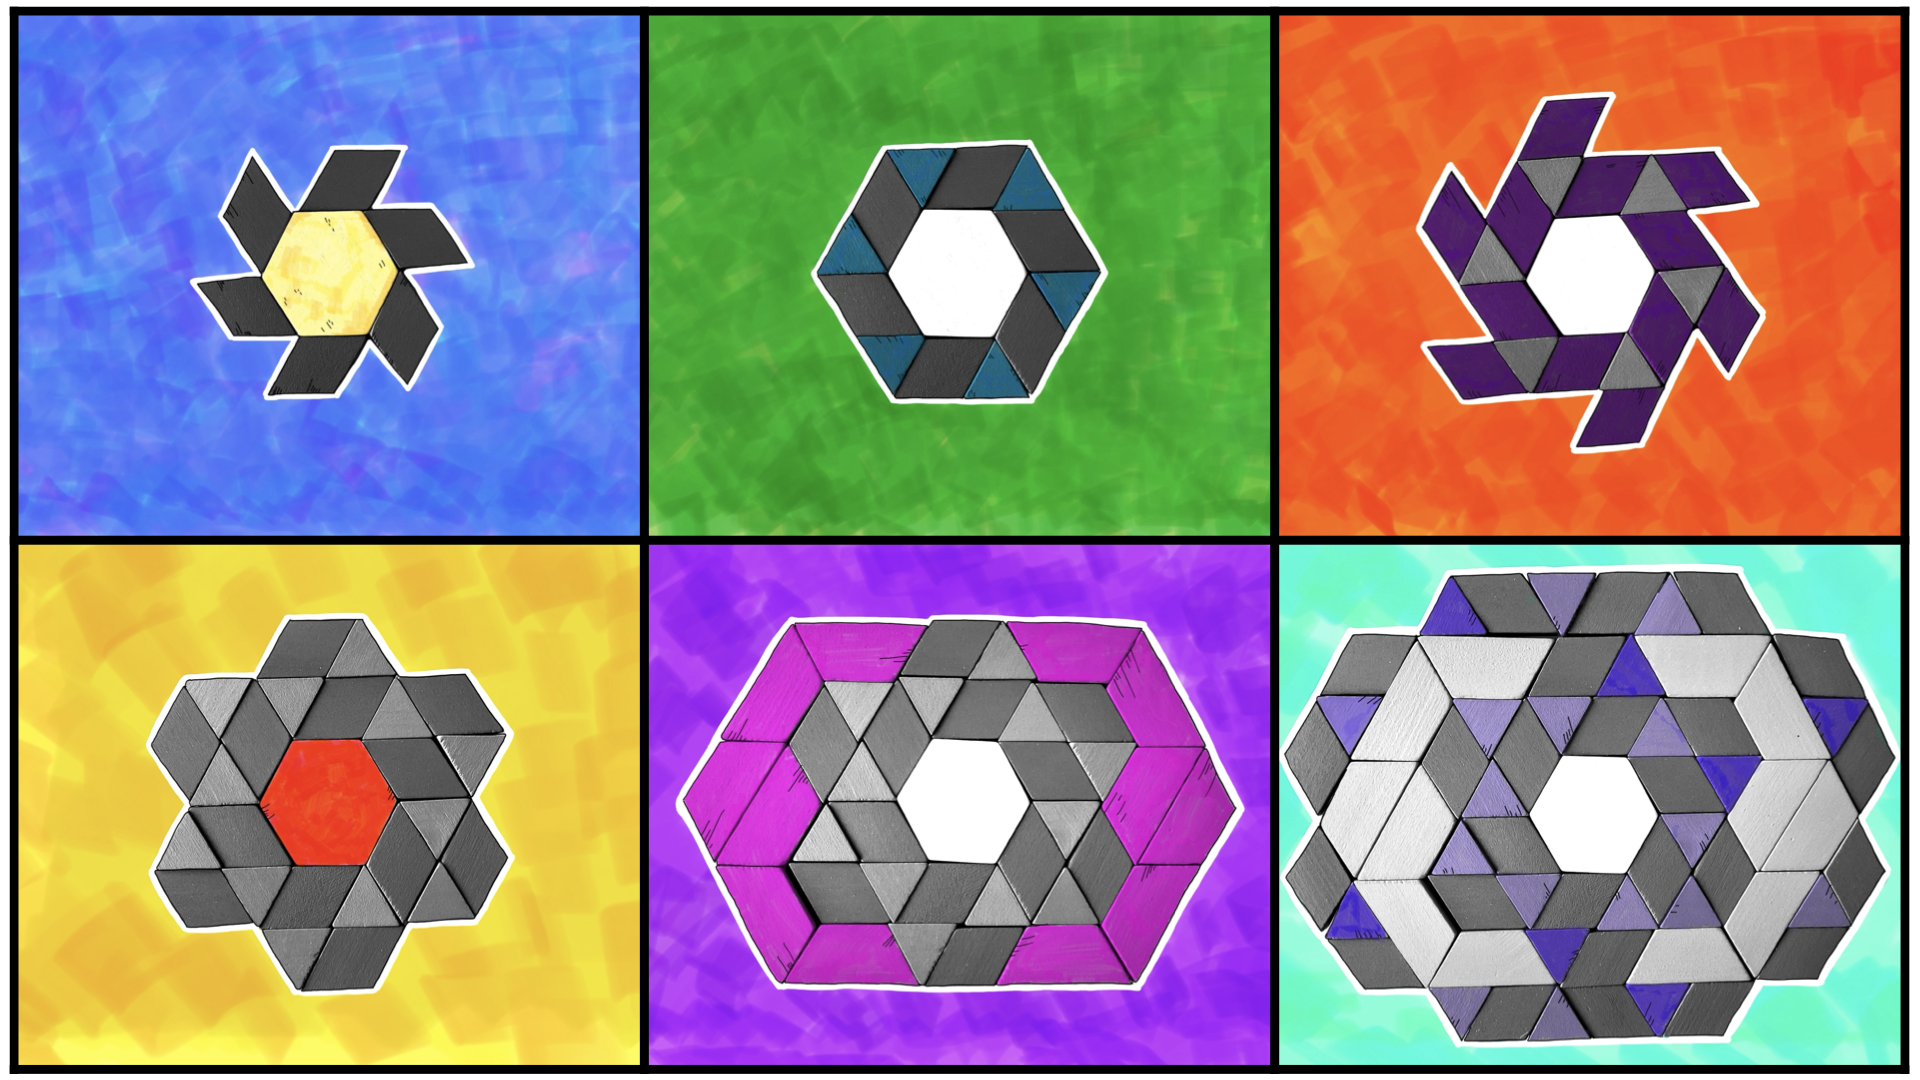 This is an image of 6 tessellations in the pop art style